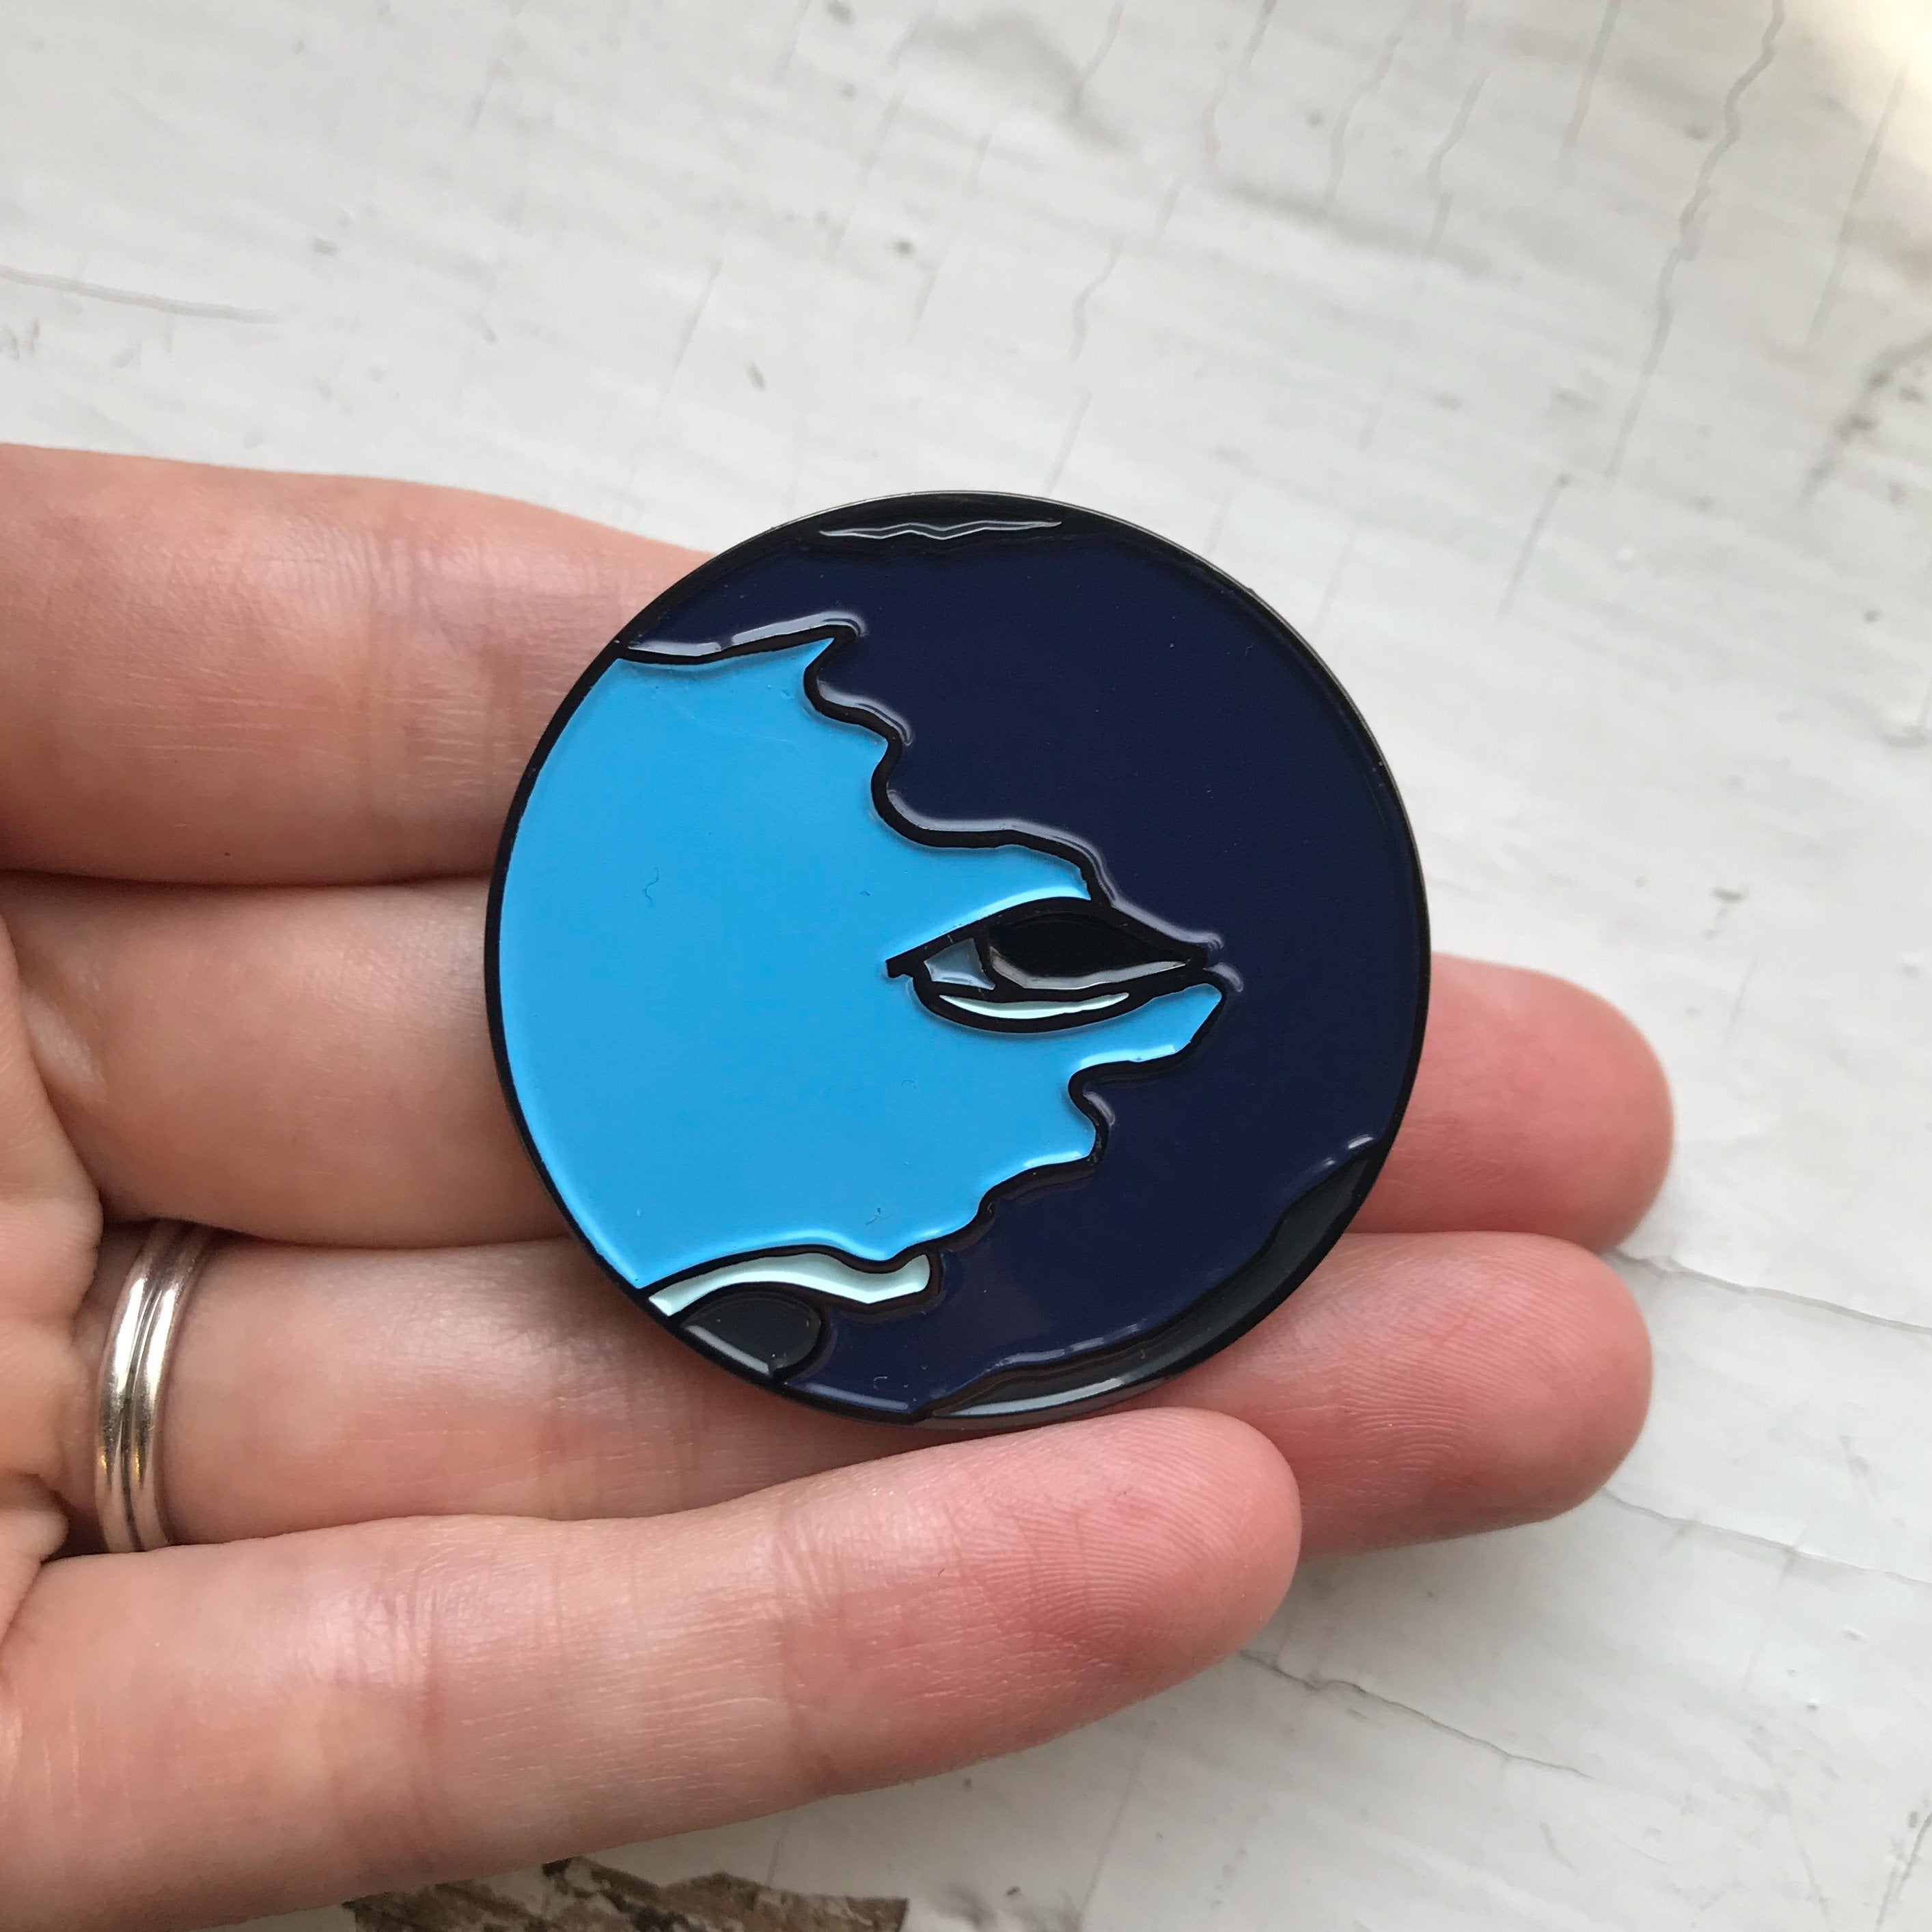 Neptune Planet Enamel Pin - Perfect Stocking Stuffer Gift
A fun and original planetary pin featuring Neptune, perfect for your jean jacket or backpack. Pin size: 1 1/2" (38mm). Discounts available for multiple orders. Proceeds - Jewelry & Watches - Bijou Her -  -  - 